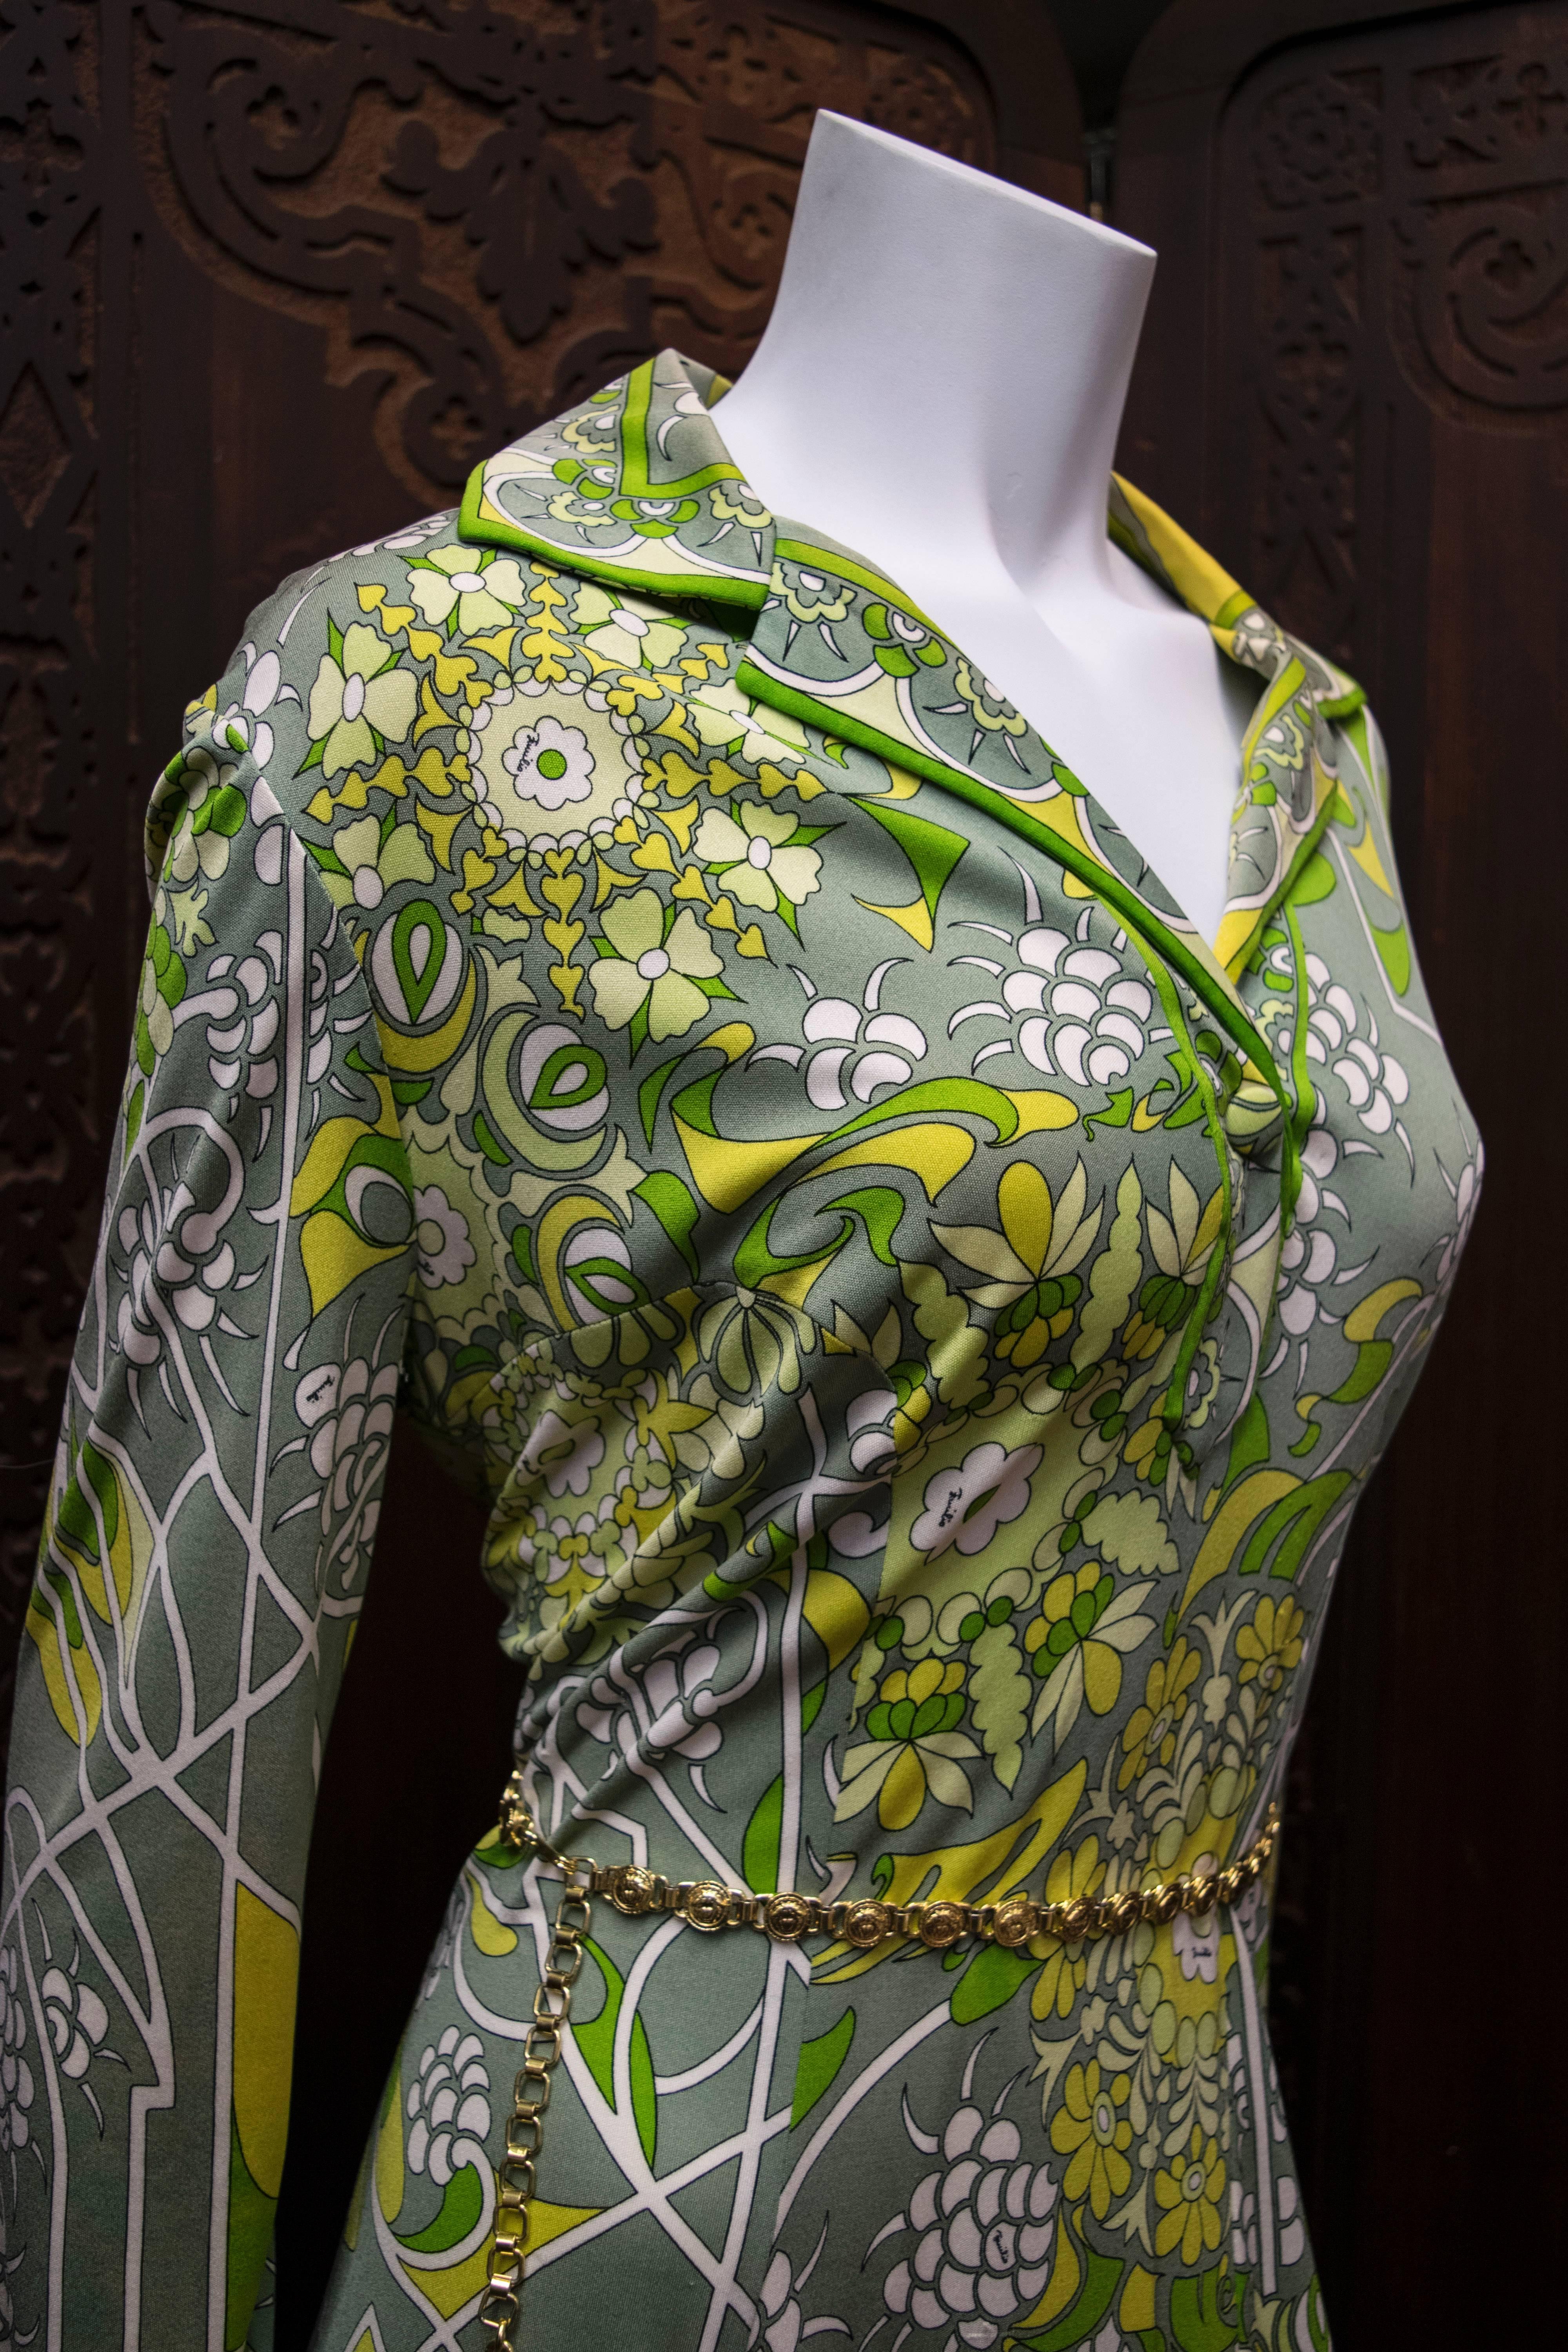 1960s Pucci Dress.
A beautiful Pucci piece with a gorgeous print which is an excellent example of the style of the 1960s. 

B 36
W 28
H 36
L 58